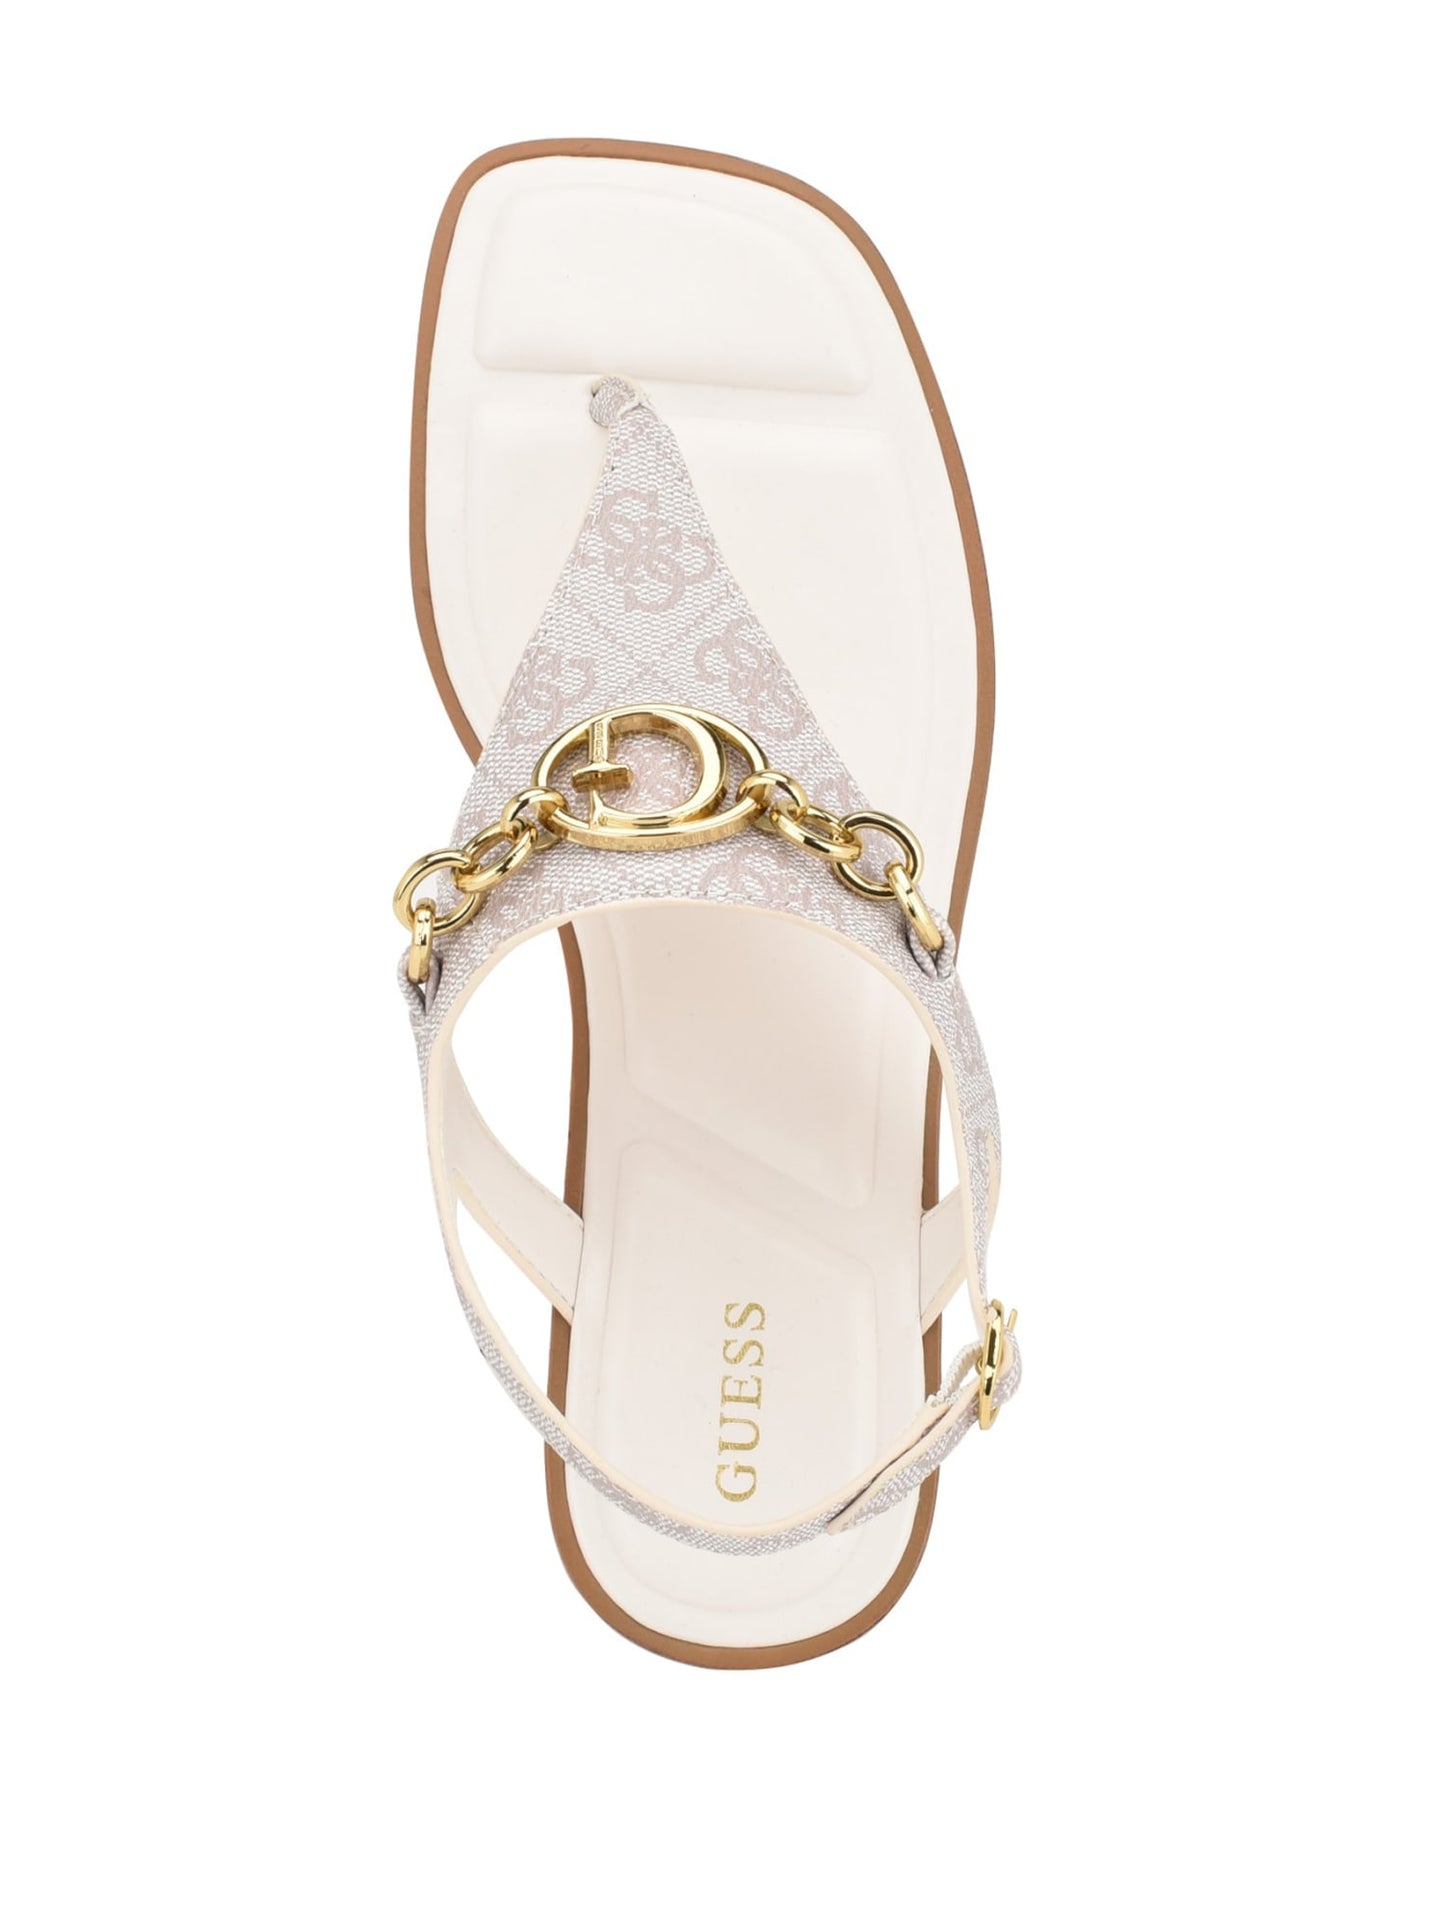 GUESS Women's Ivory Rissy Logo Sandals GWRISSY Top View